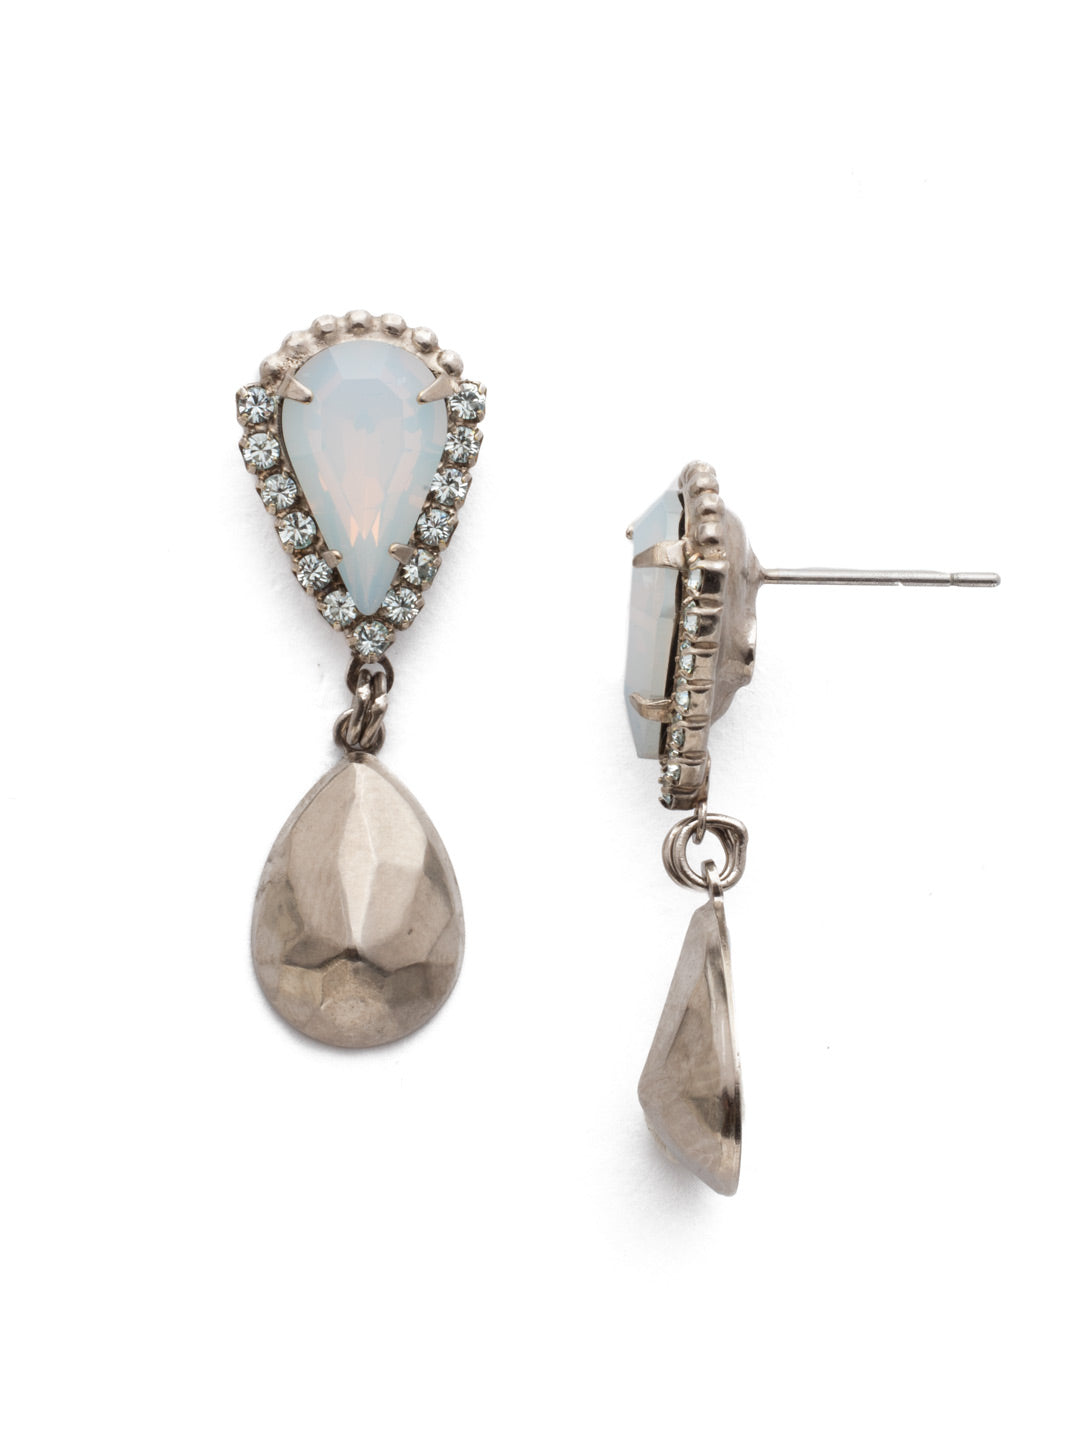 Lysa Drop Earring - EEF2ASGLC - <p>A simple teardrop cut shape dangles from these statement earrings showcasing another teardrop crystal set atop a backdrop of tiny crystals. You don't need any other accessories when you're wearing these earrings. From Sorrelli's Glacier collection in our Antique Silver-tone finish.</p>